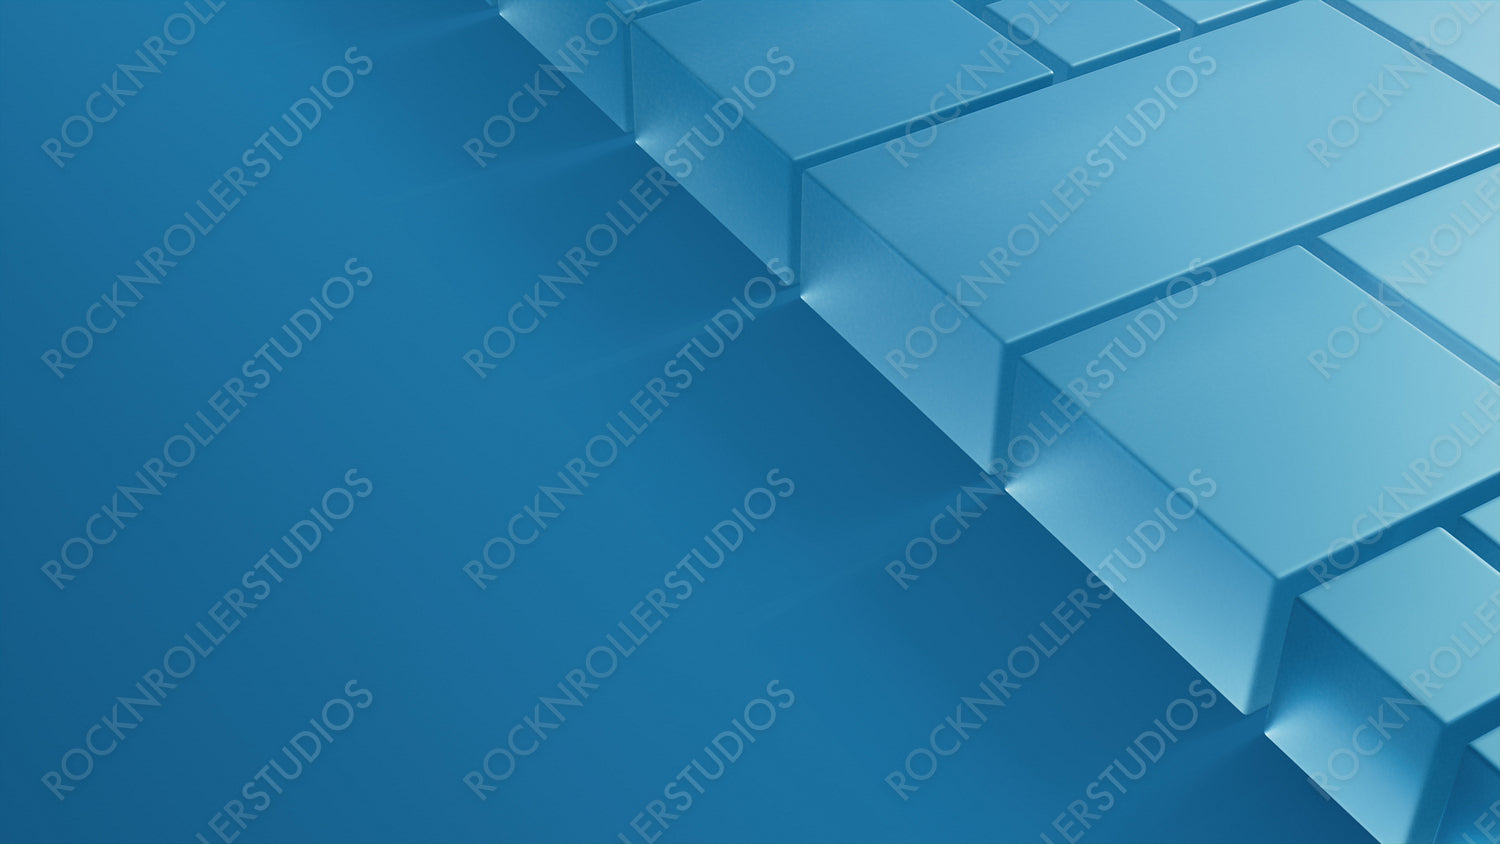 Frosted Glass Shapes on a Blue Surface. Futuristic Tech Design with copy space. 3D Render.